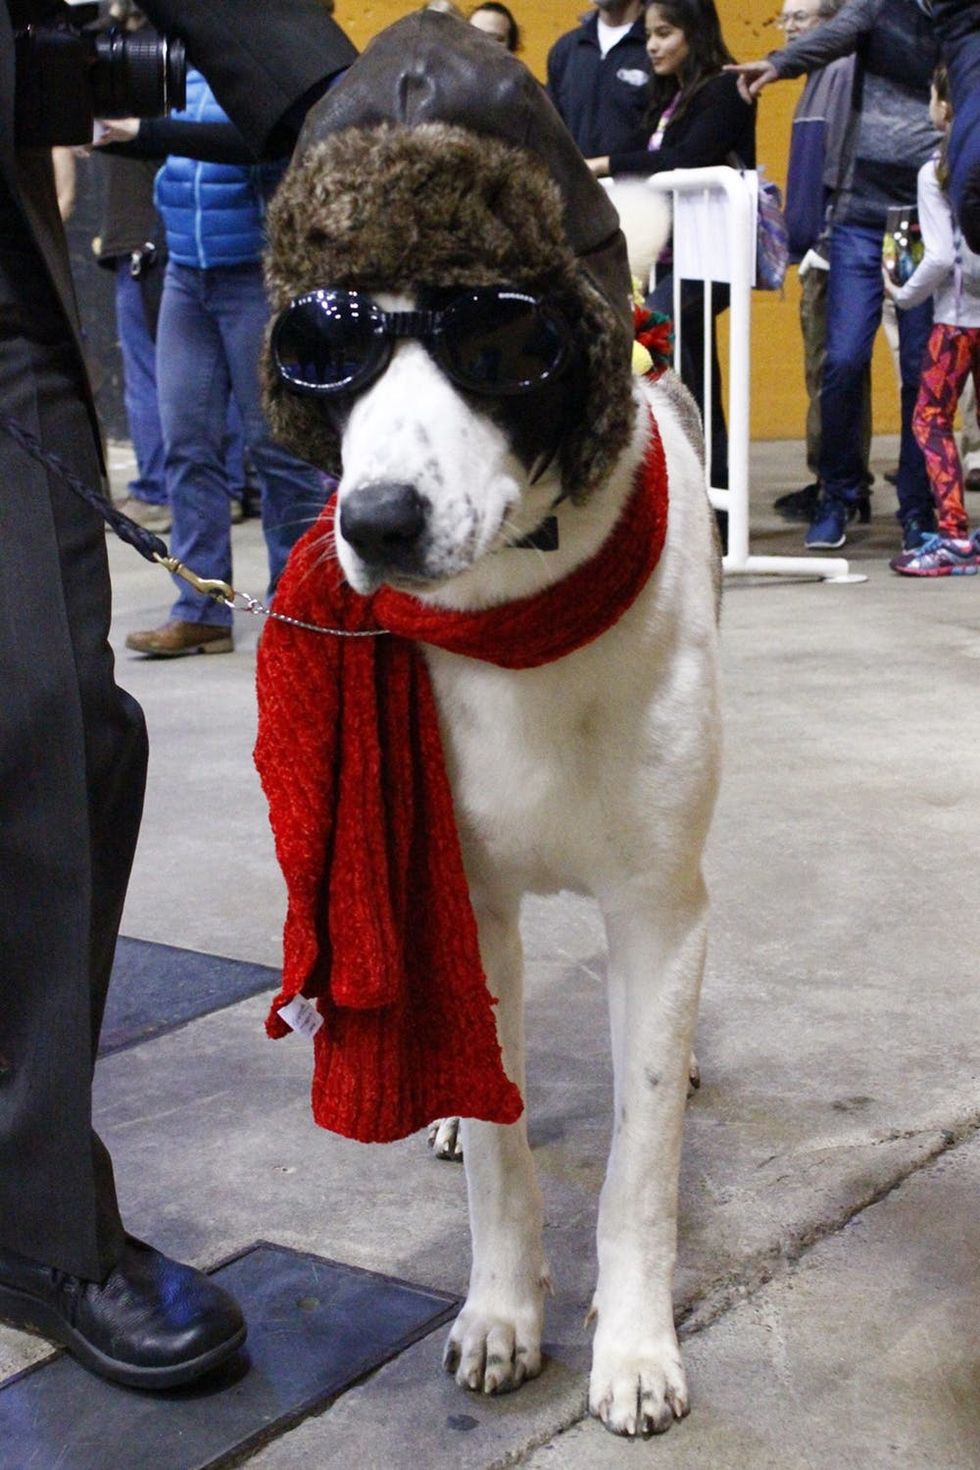 The 9 Cutest Dog Costumes We Spotted at the San Francisco Dog Show